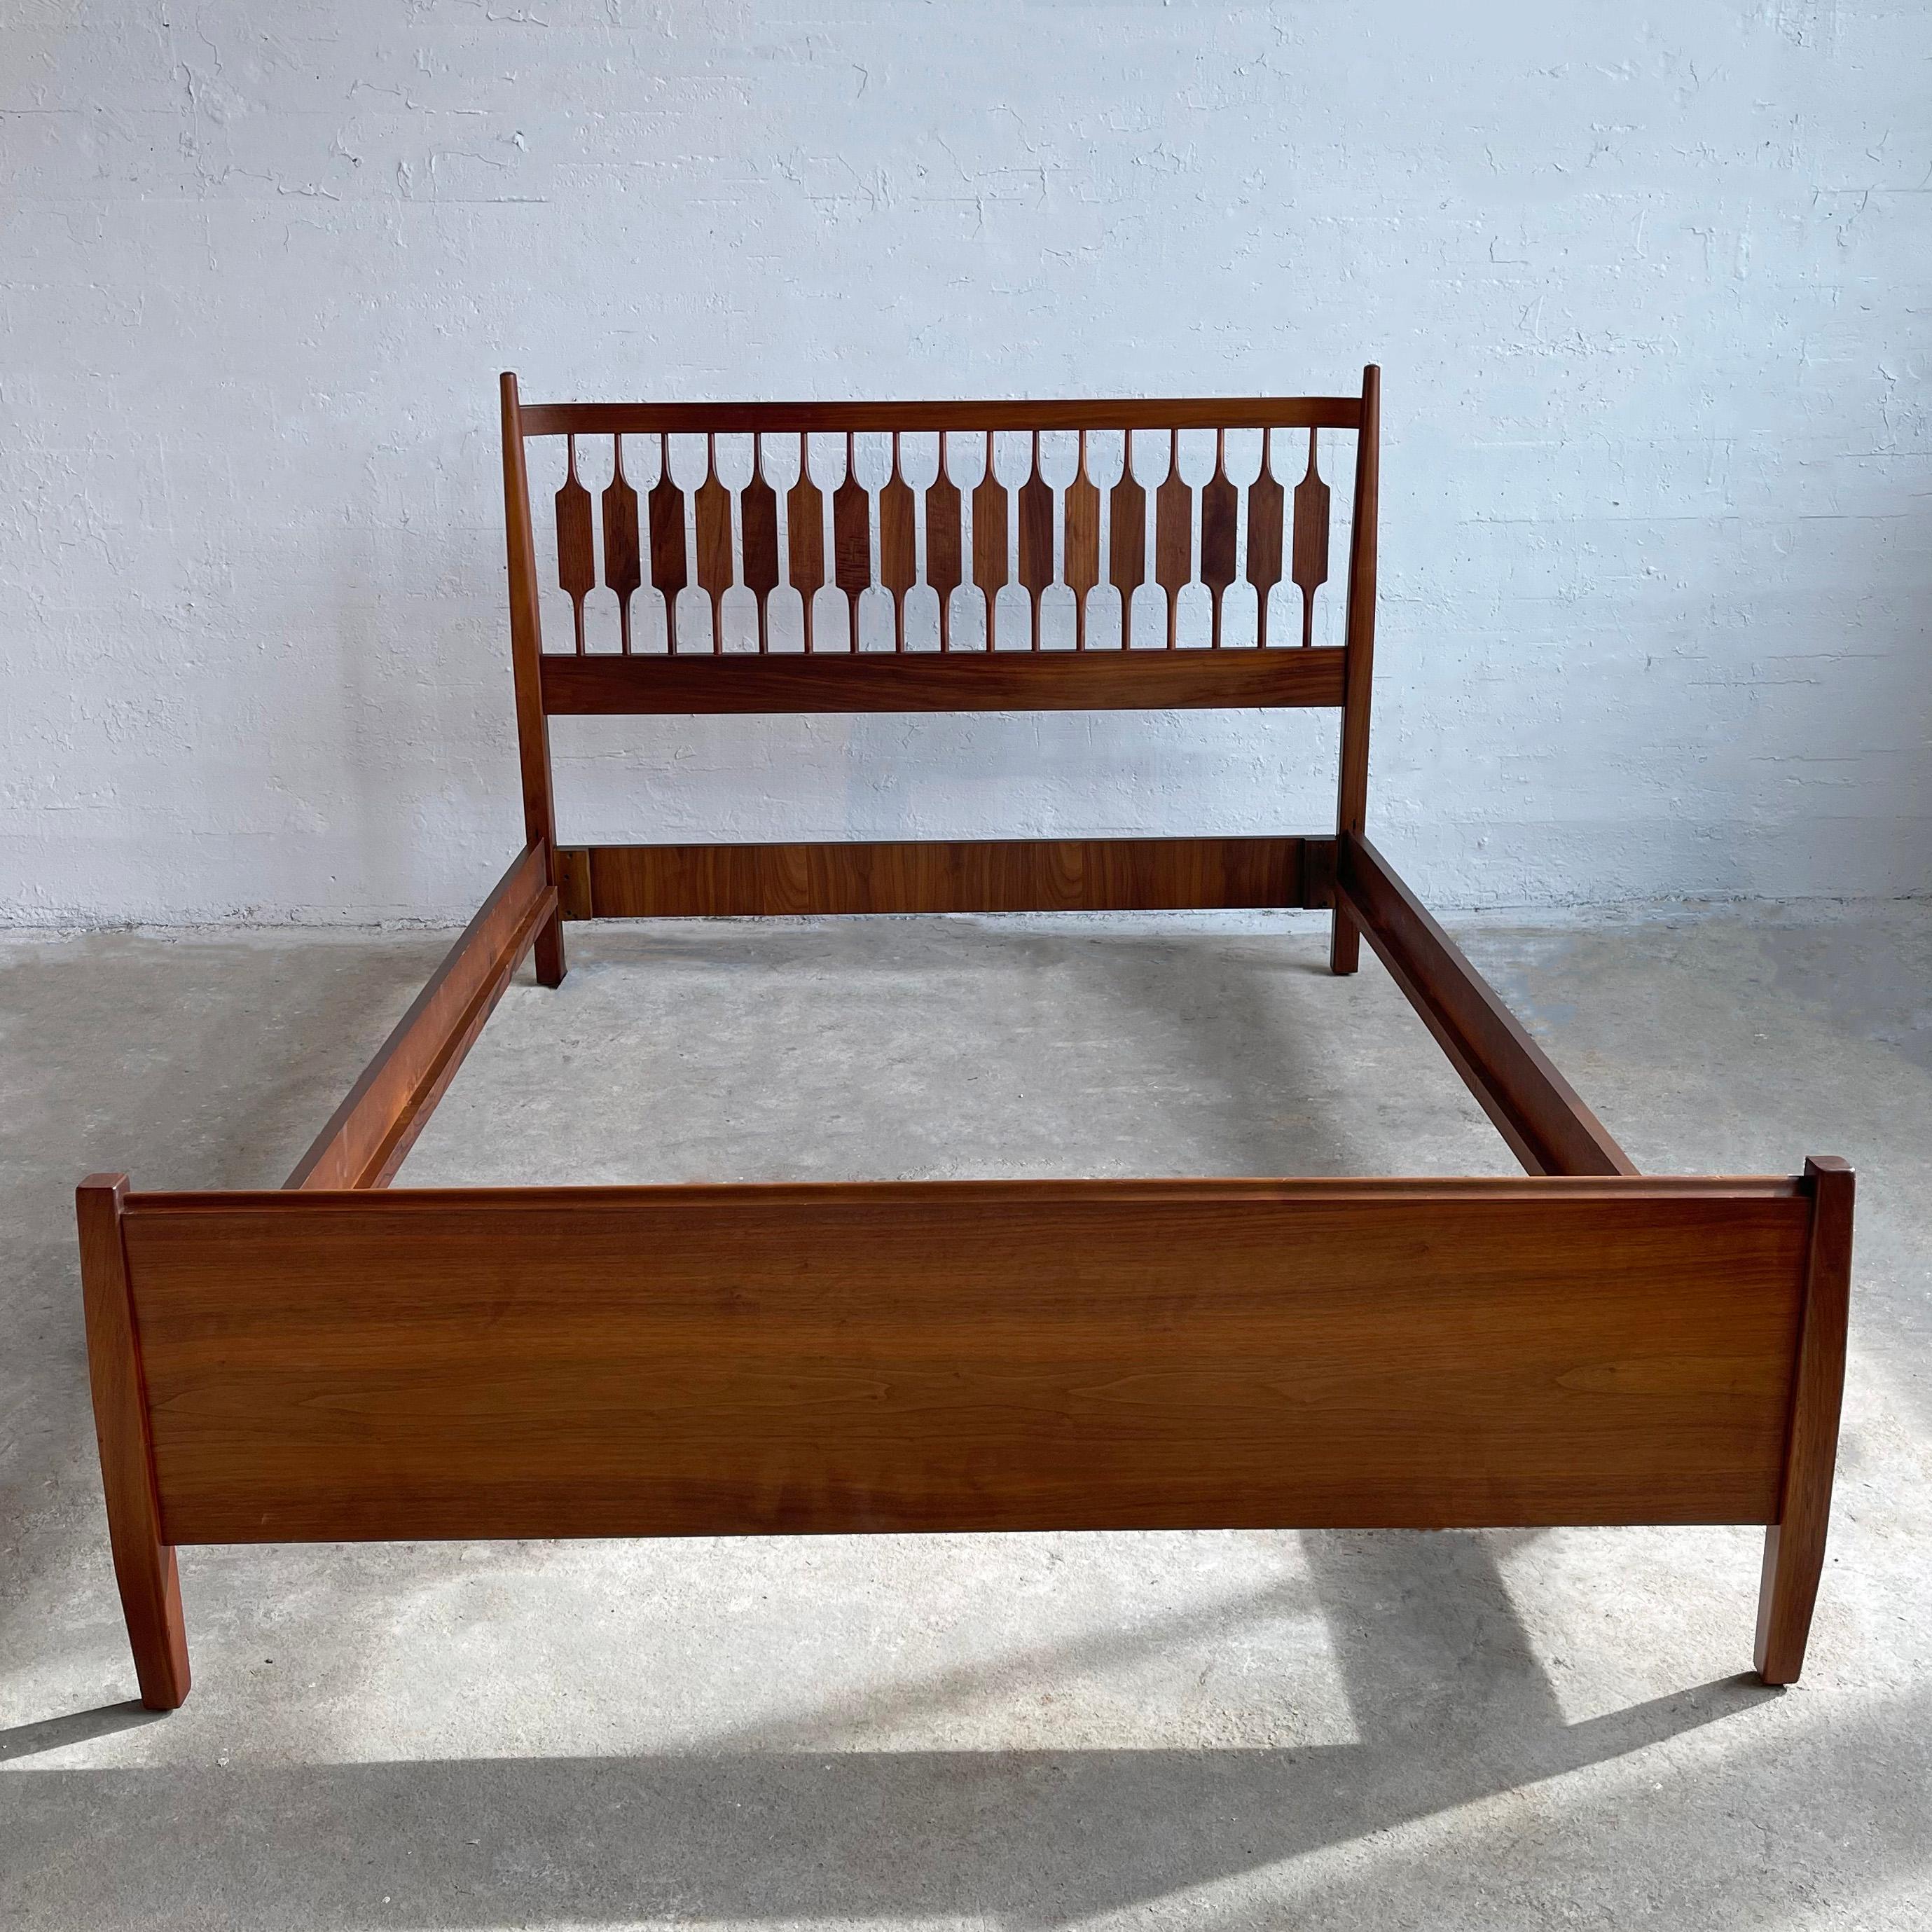 Full Bed And Walnut Headboard By Kipp Stewart & Stewart McDougall For Drexel In Good Condition For Sale In Brooklyn, NY